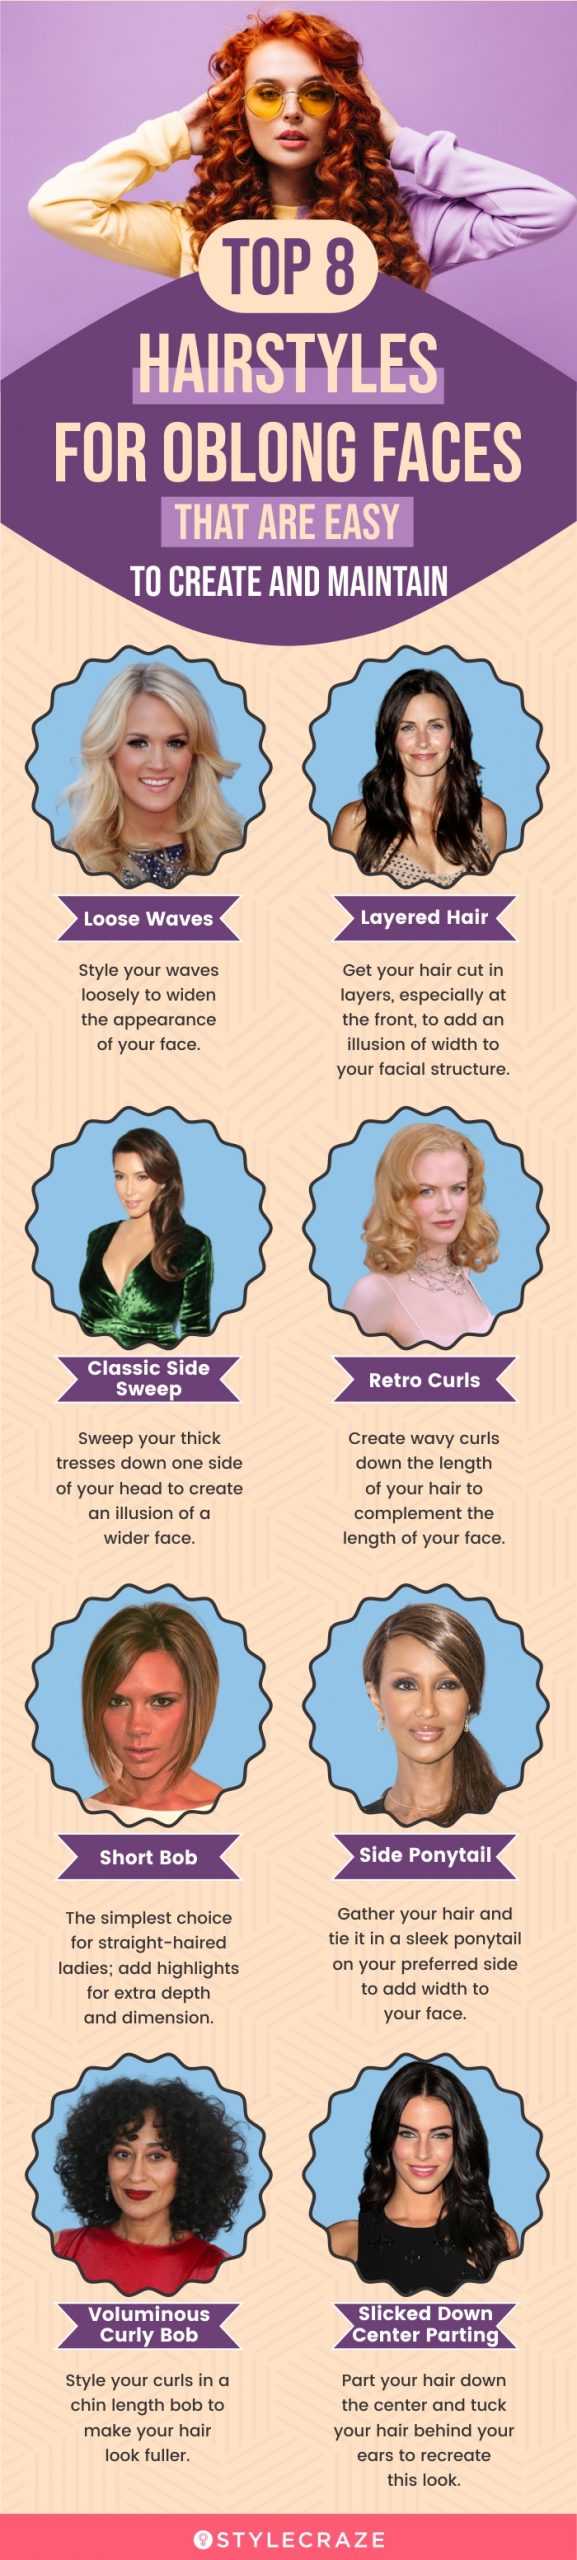 top 8 hairstyles for oblong faces that are easy to create and maintain (infographic)